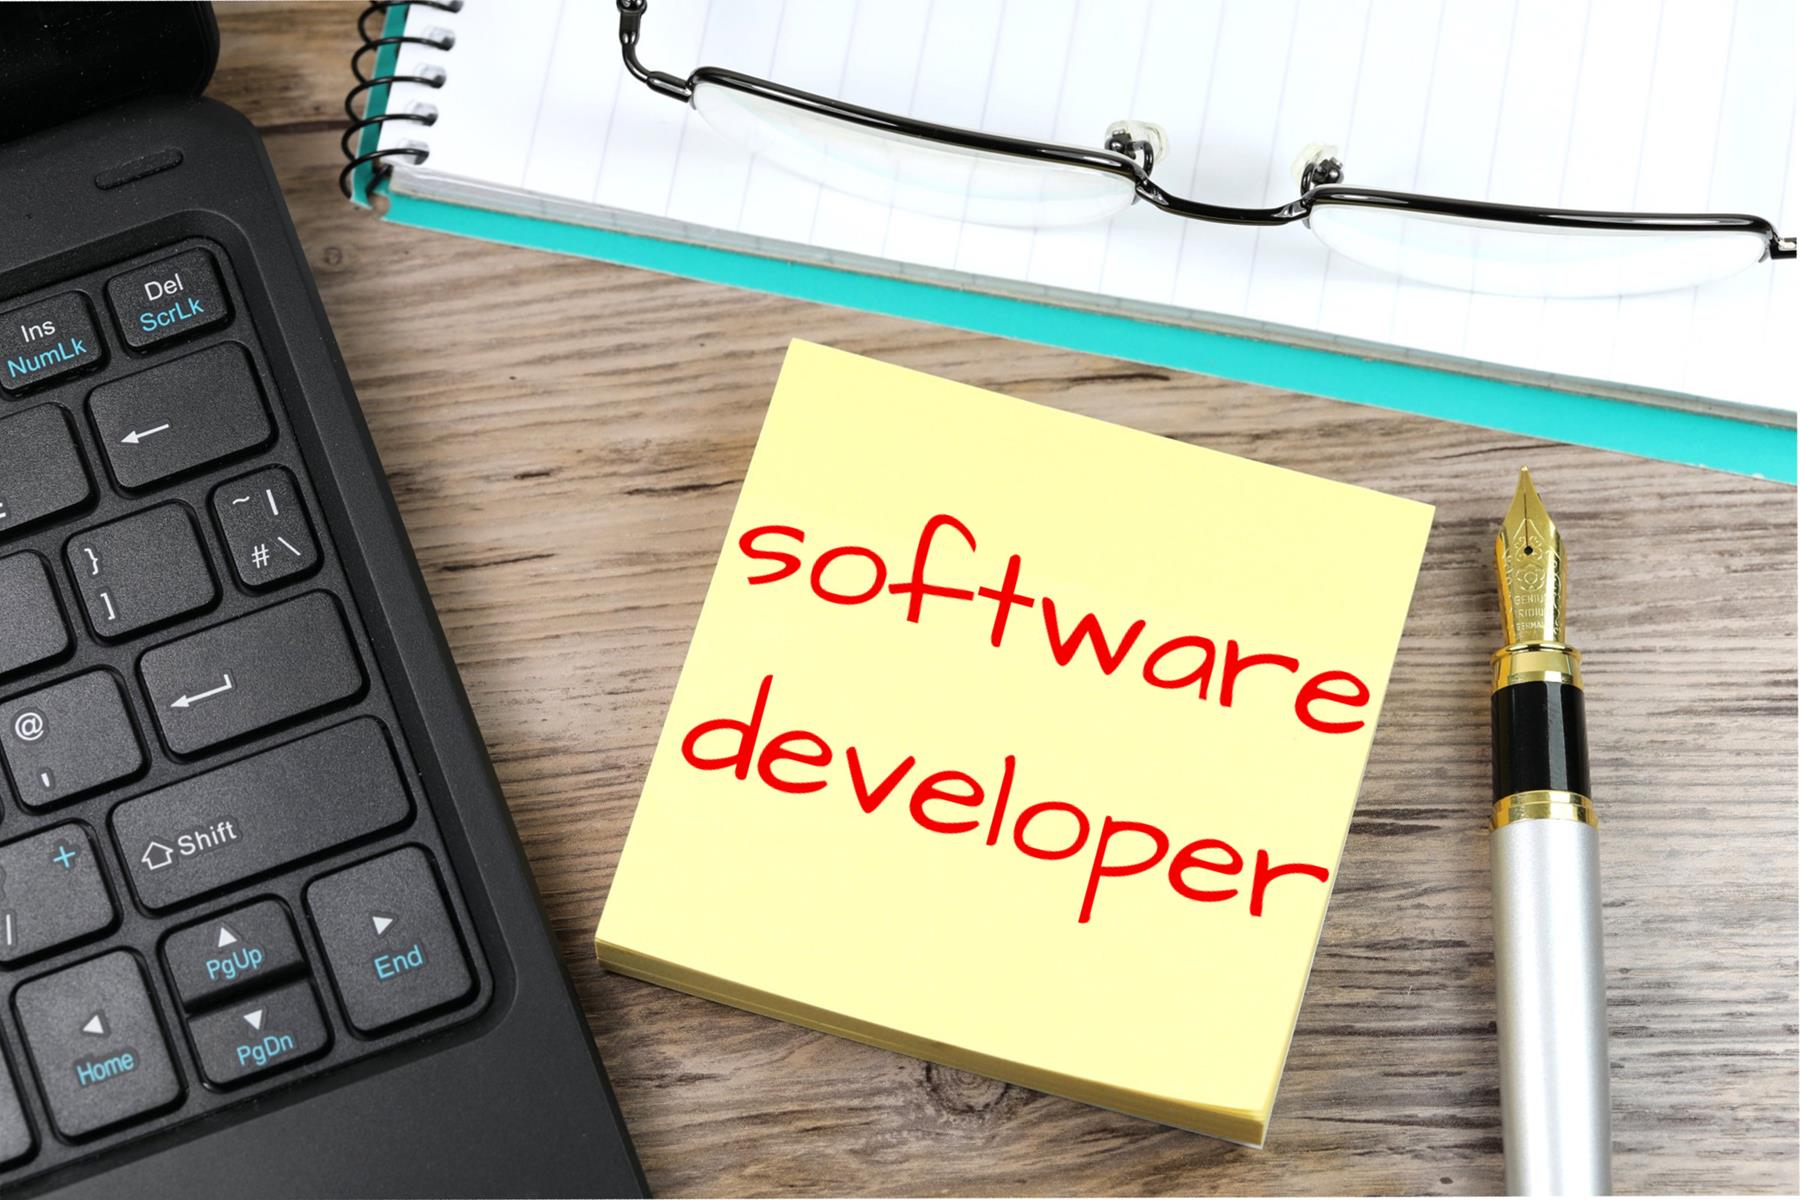 Software Developer Free Of Charge Creative Commons Post It Note Image